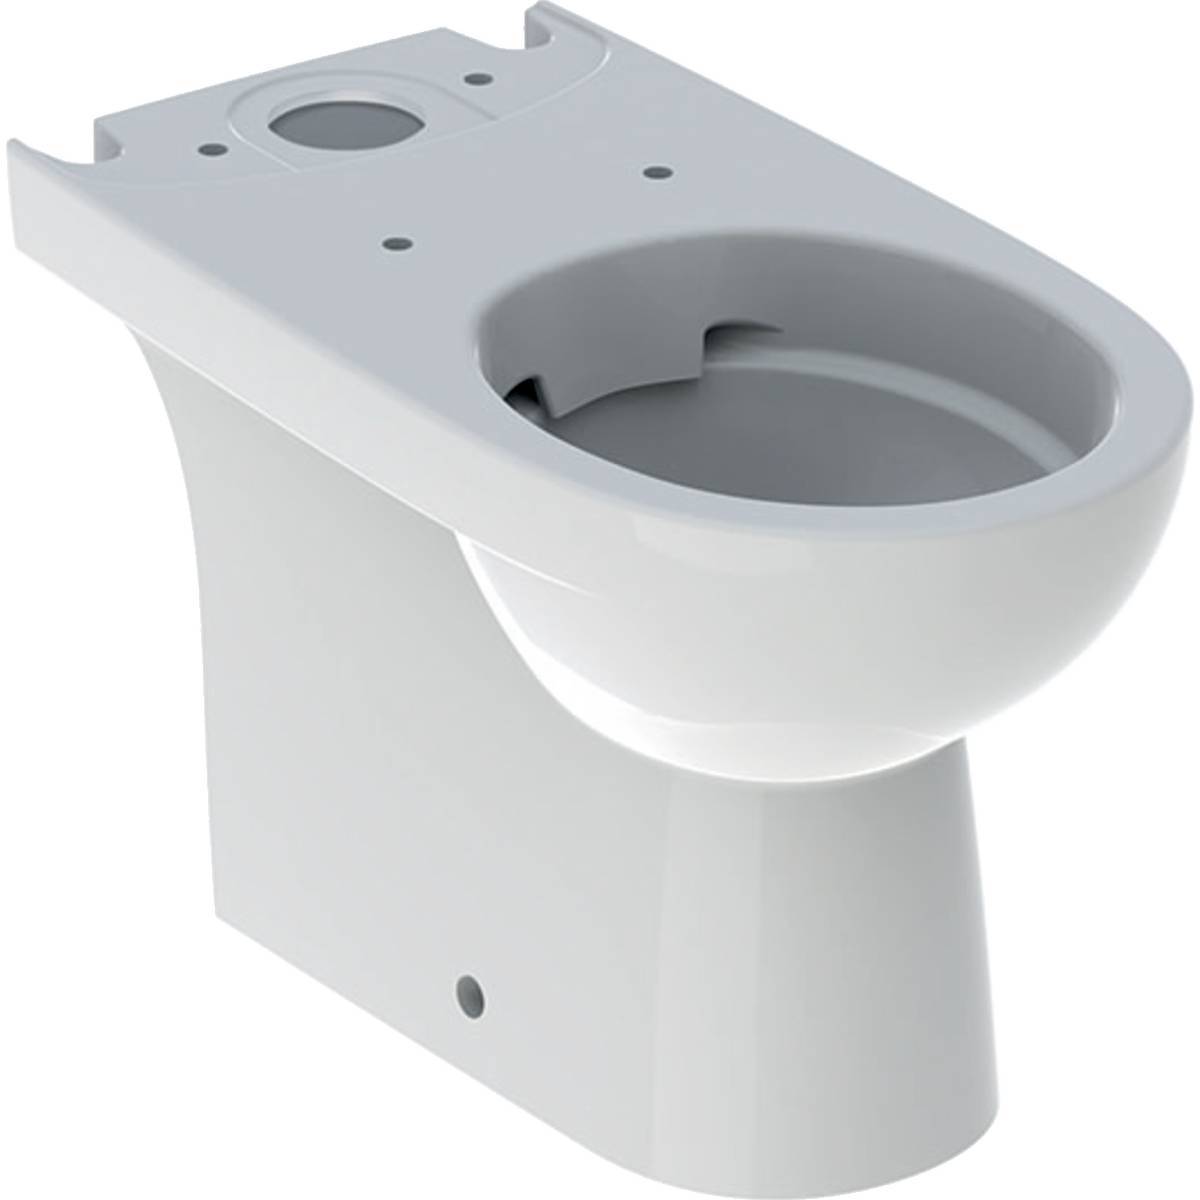 Selnova floor-standing WC for close-coupled exposed cistern, washdown, multidirectional outlet, semi-shrouded, Rimfree